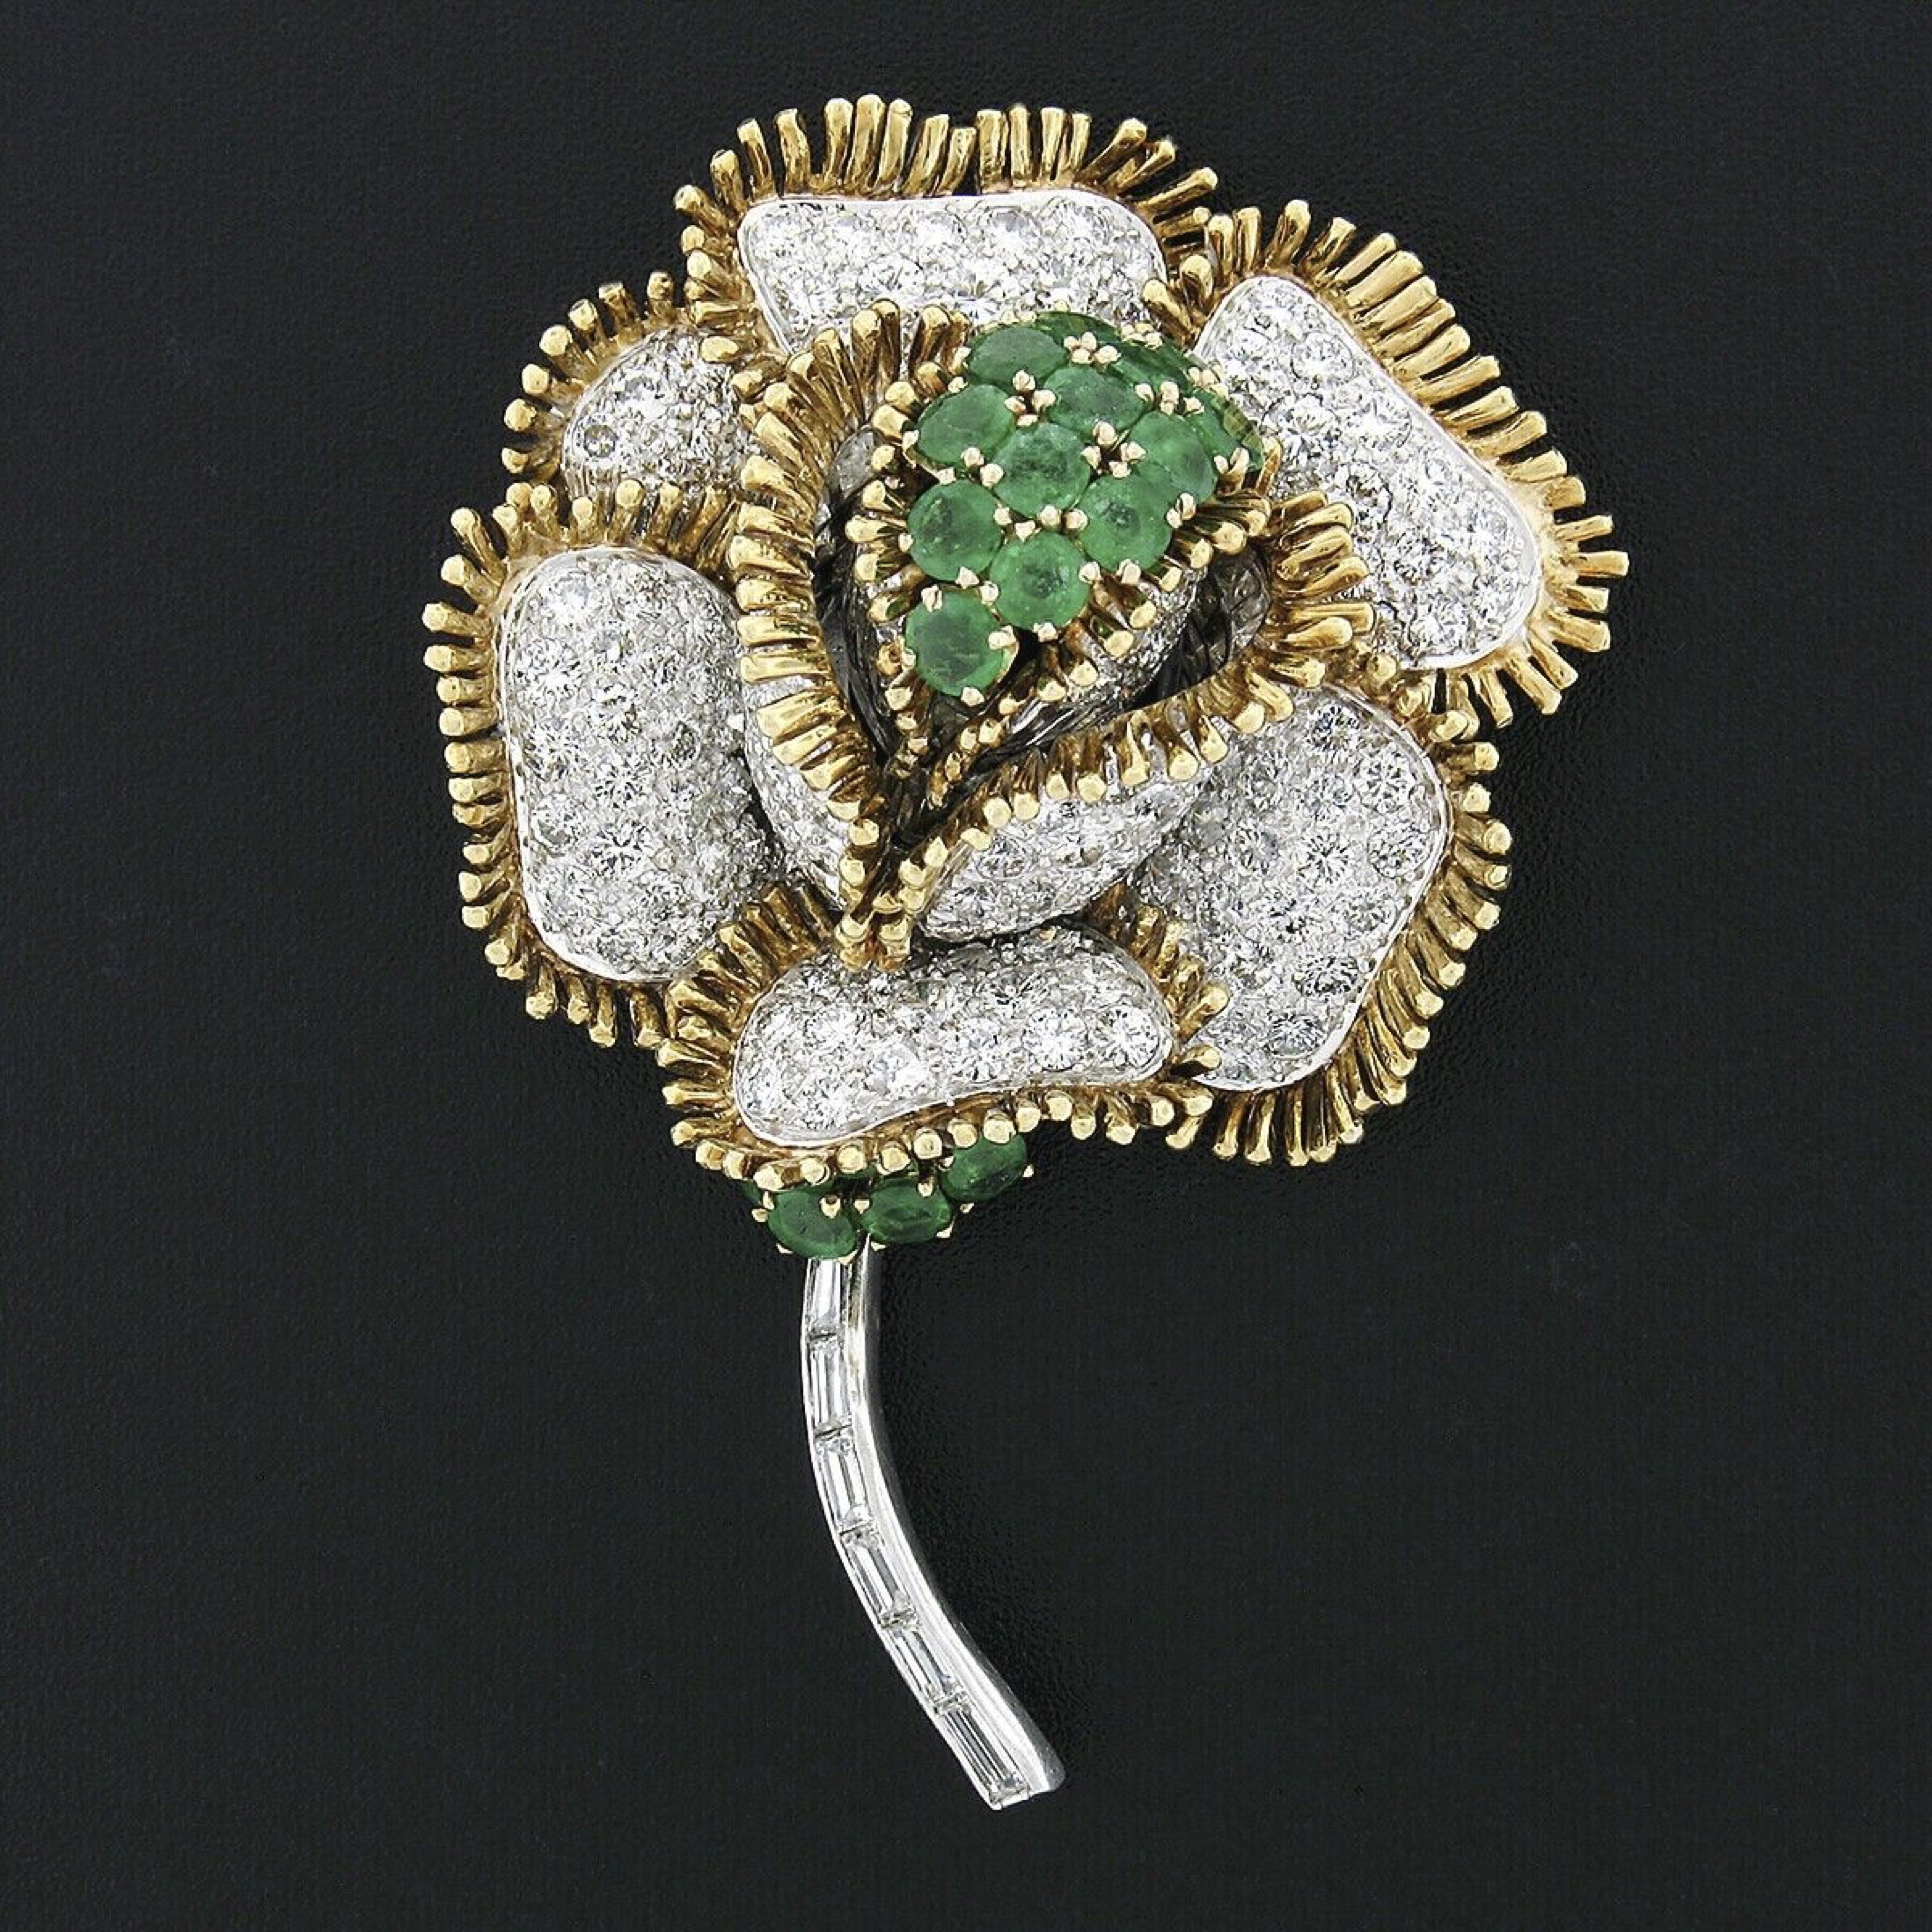 This superb vintage brooch is very well crafted in solid 18k gold and solid platinum and features a magnificent three-dimensional flower design that's completely covered with the finest quality diamonds and emeralds throughout. The stem and flower